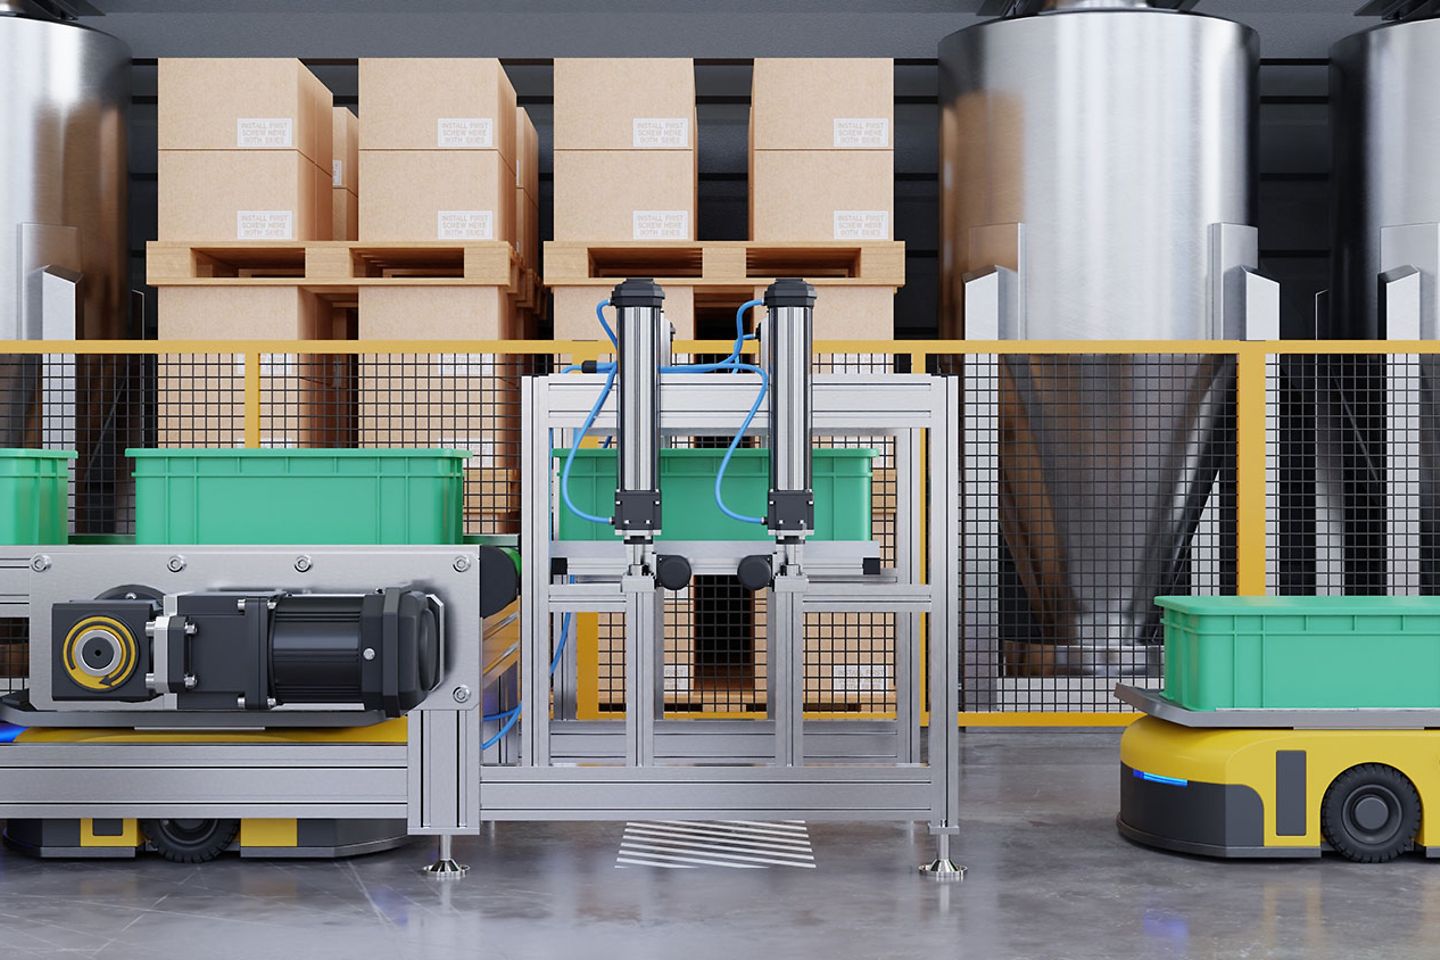 Technological devices automate production and logistics